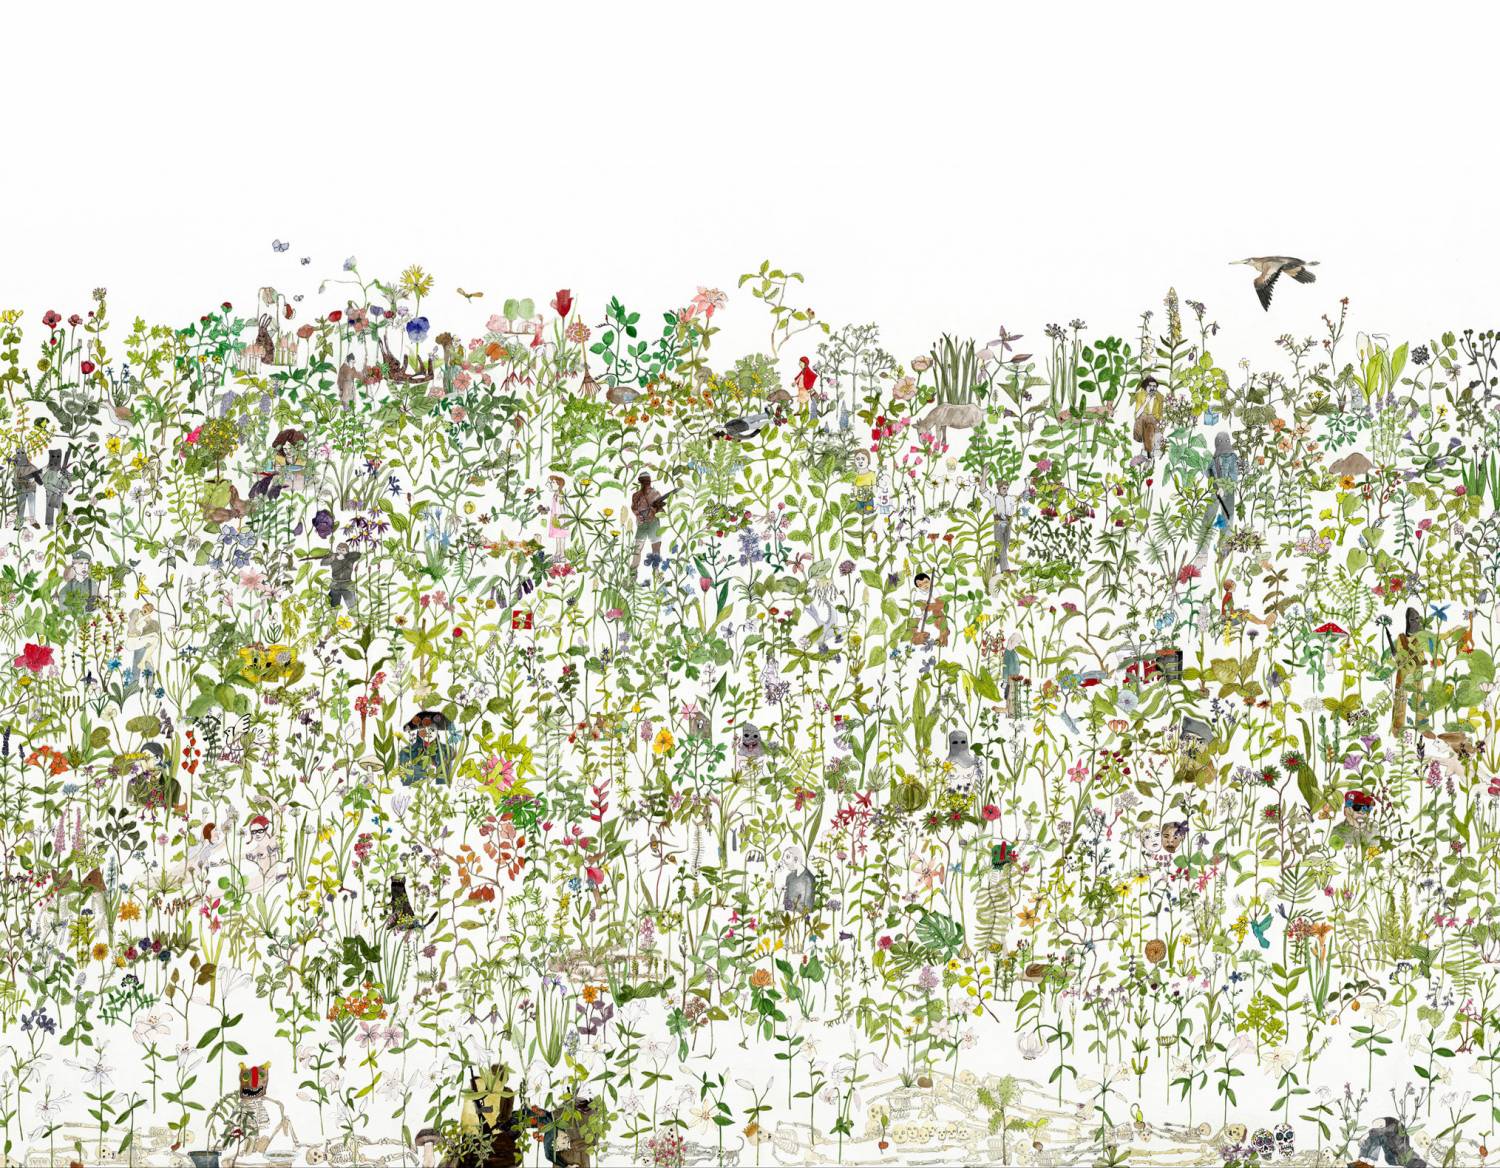 In the Garden wallpaper by Anna Surie for NLXL LAB | Flodeau.com